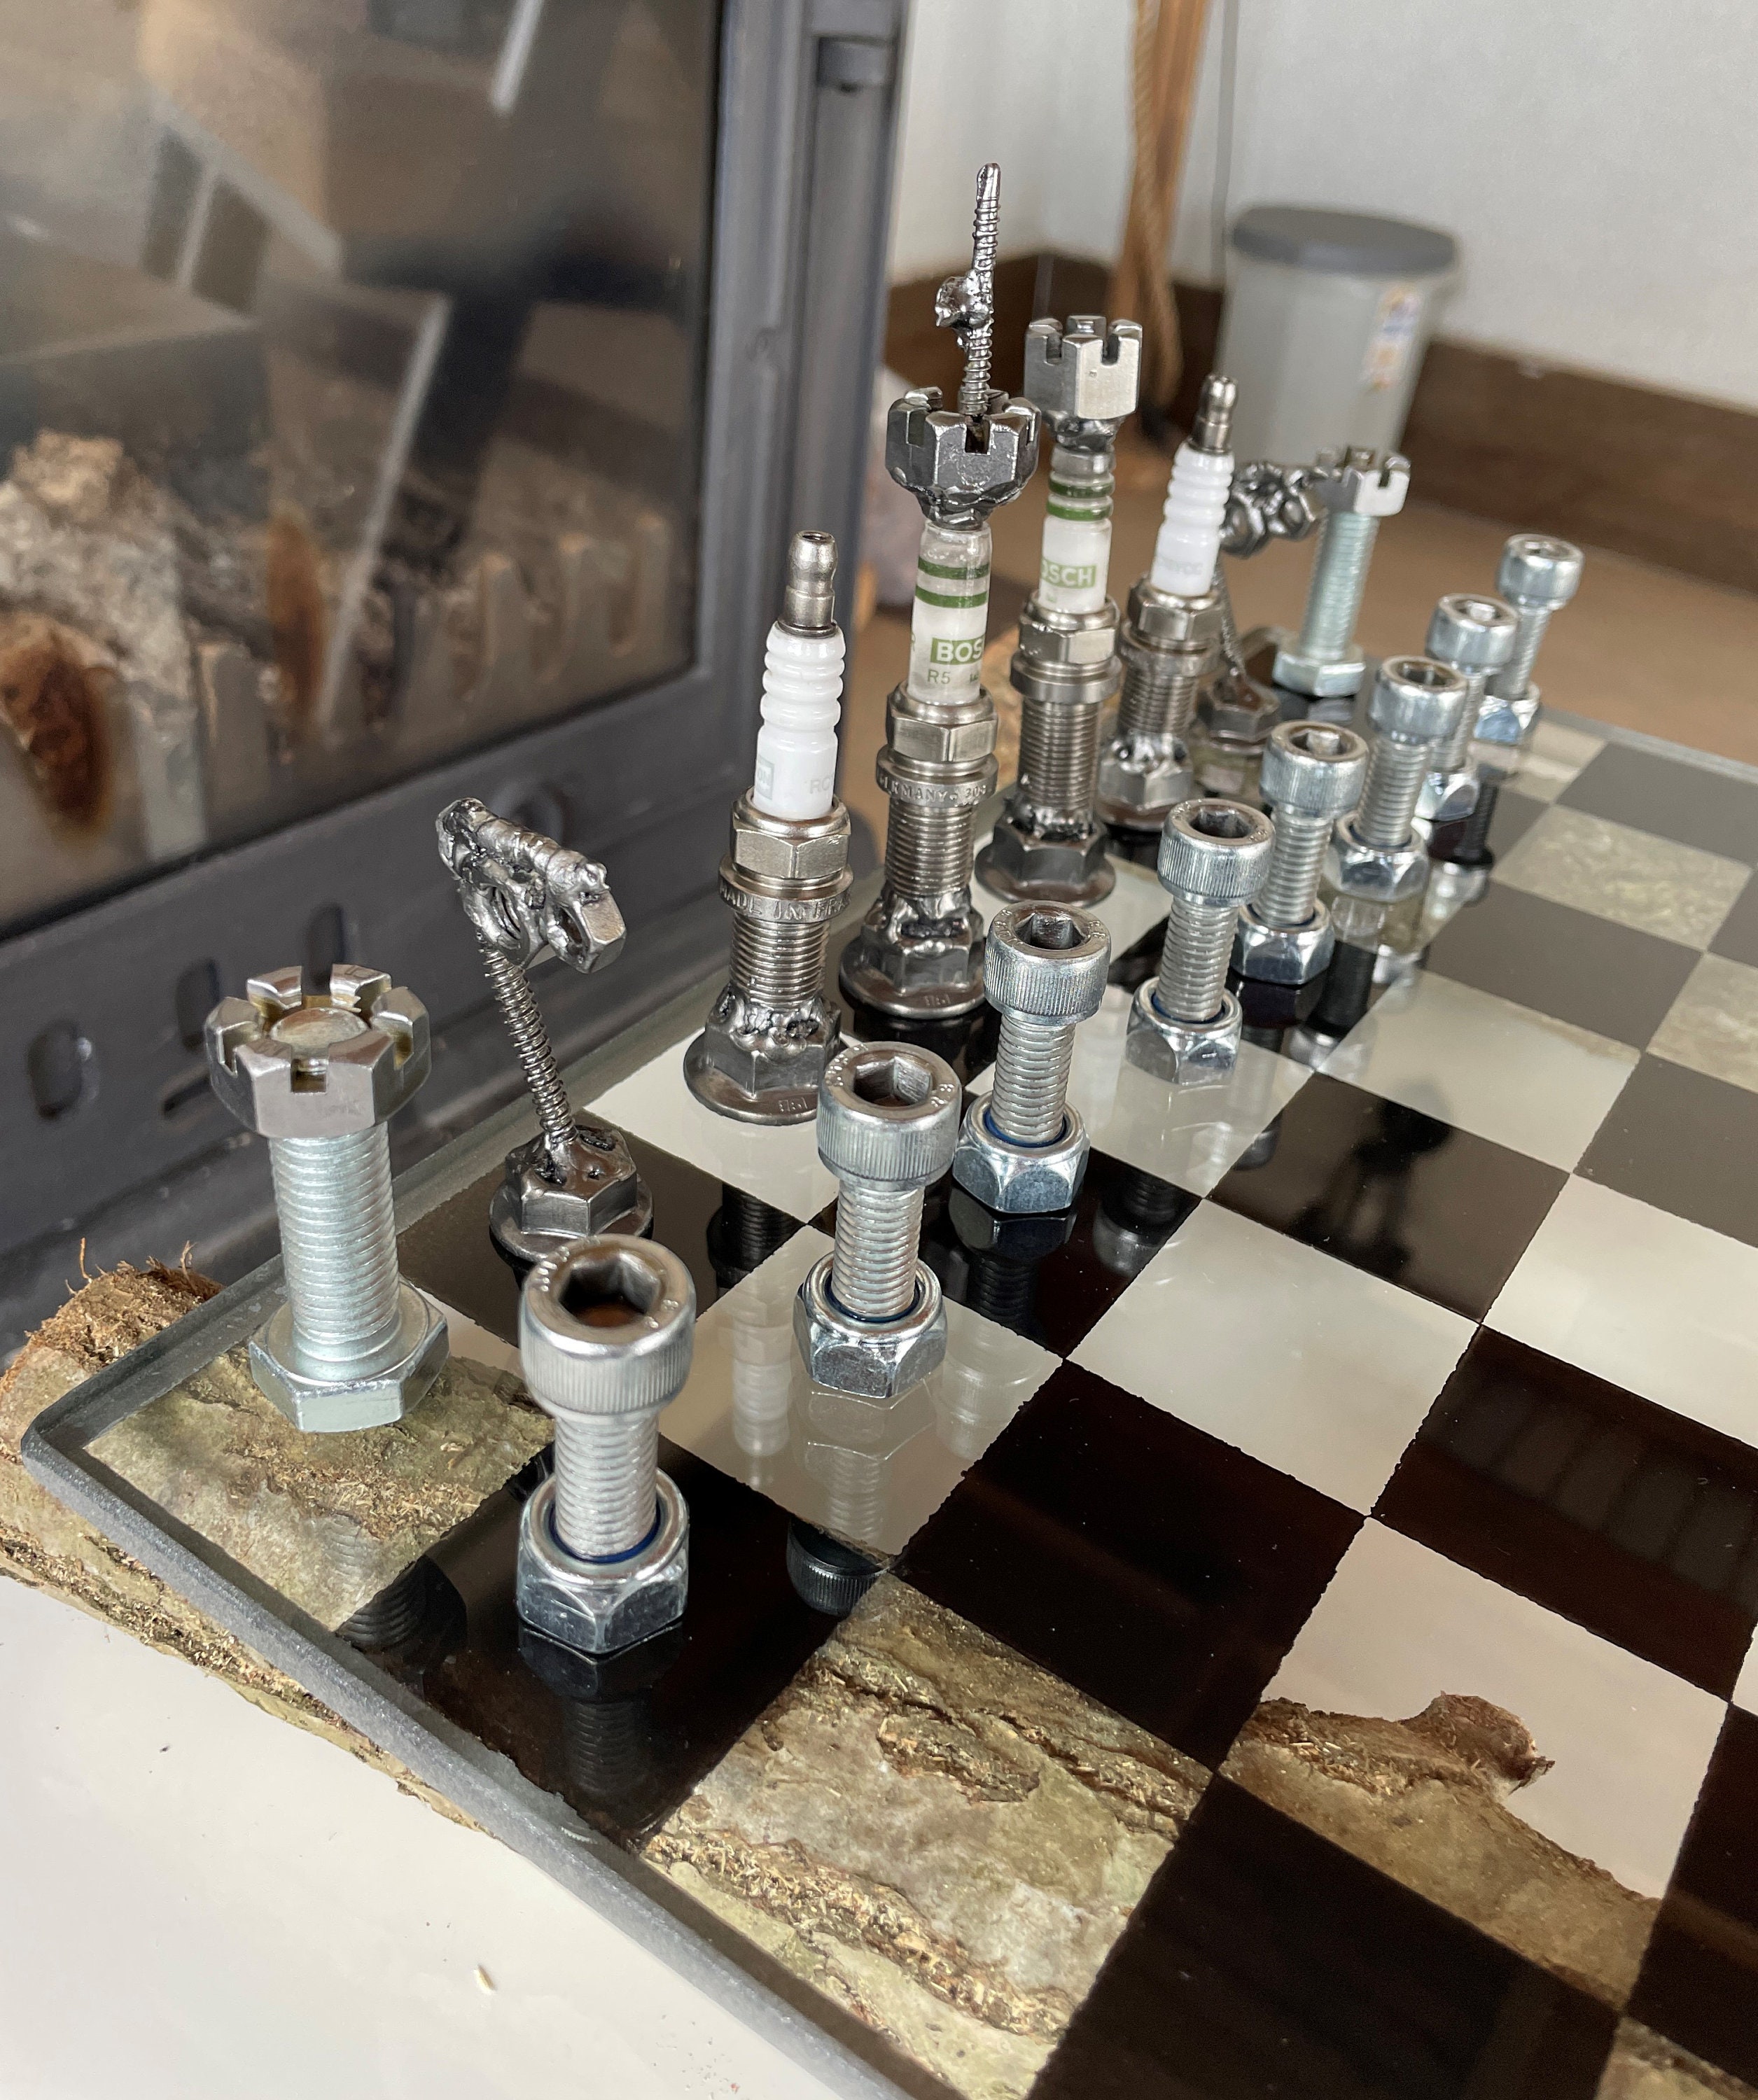 Chess Set Pieces From Bolts and Nuts / Real Car Engine Parts / 